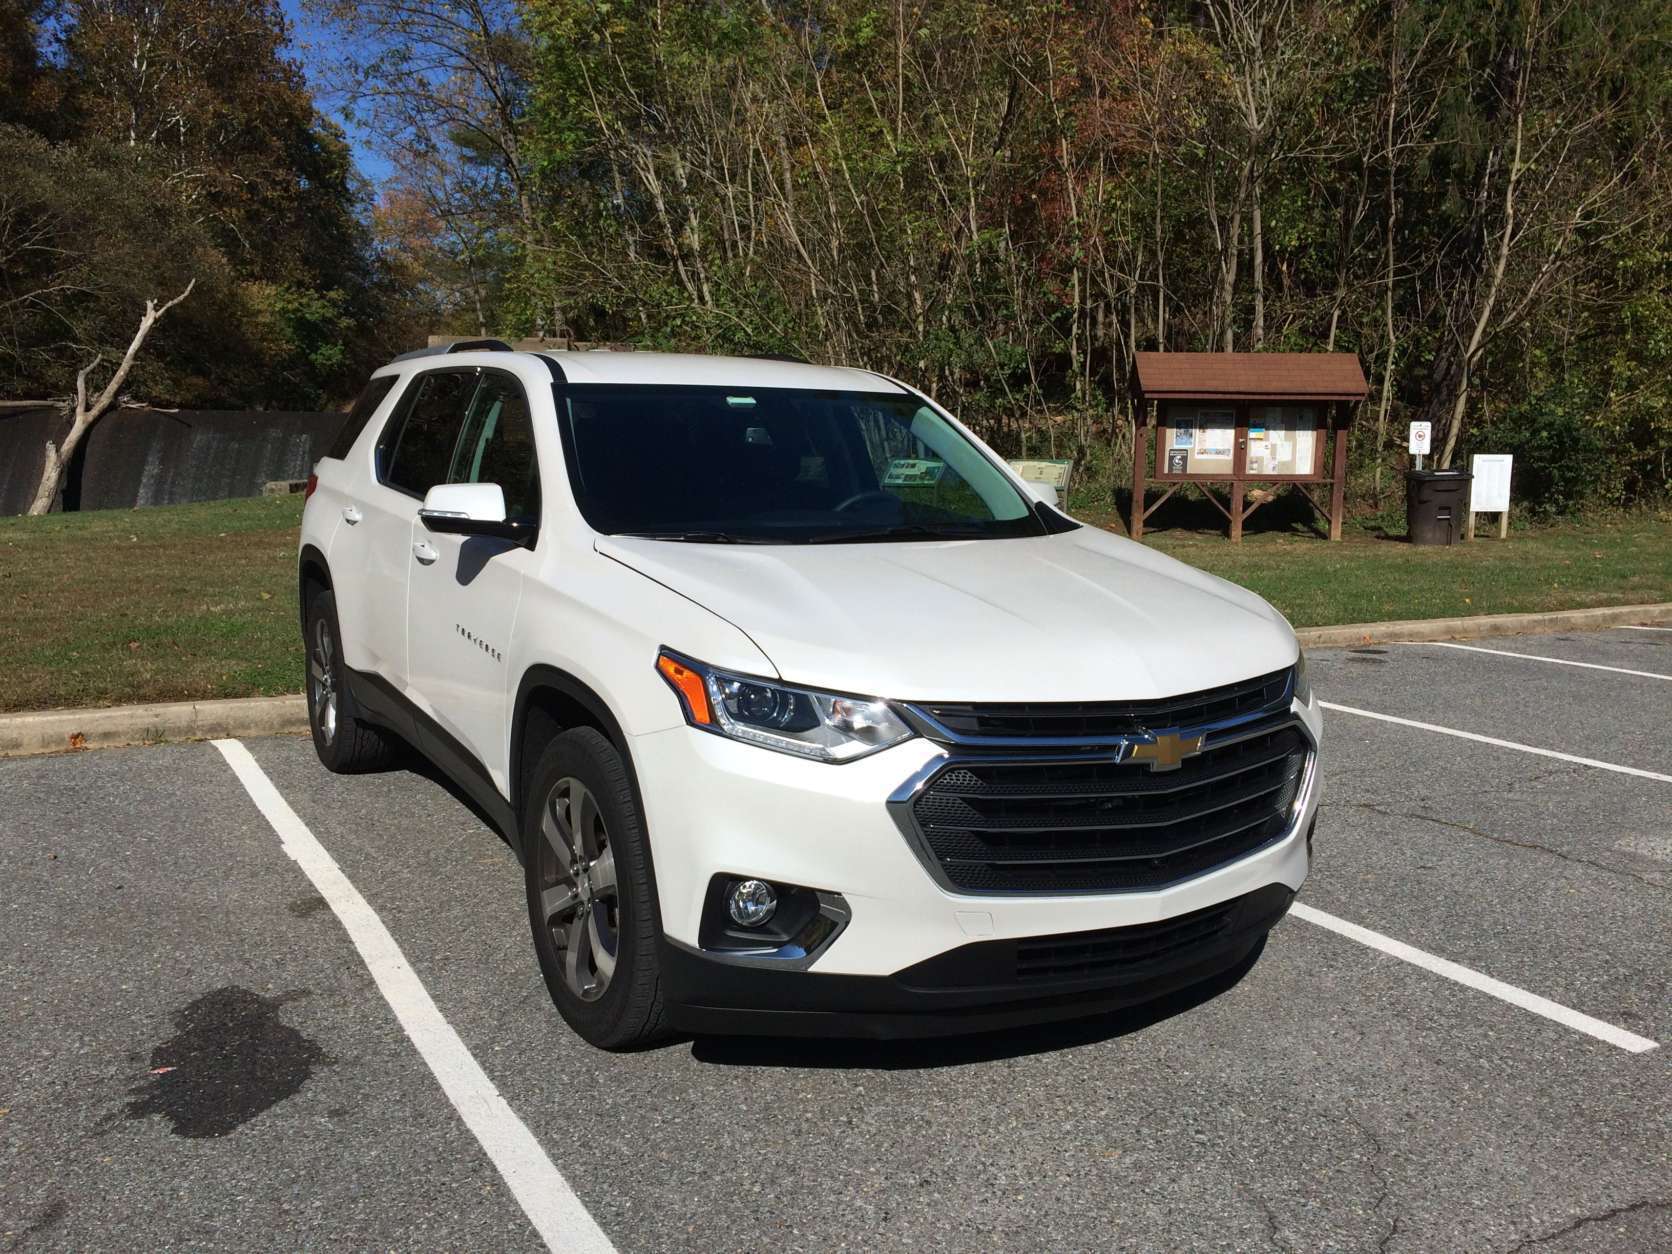 For 2018, Chevy has decided it’s time to really get competitive in the midsize crossover class. (WTOP/Mike Parris)